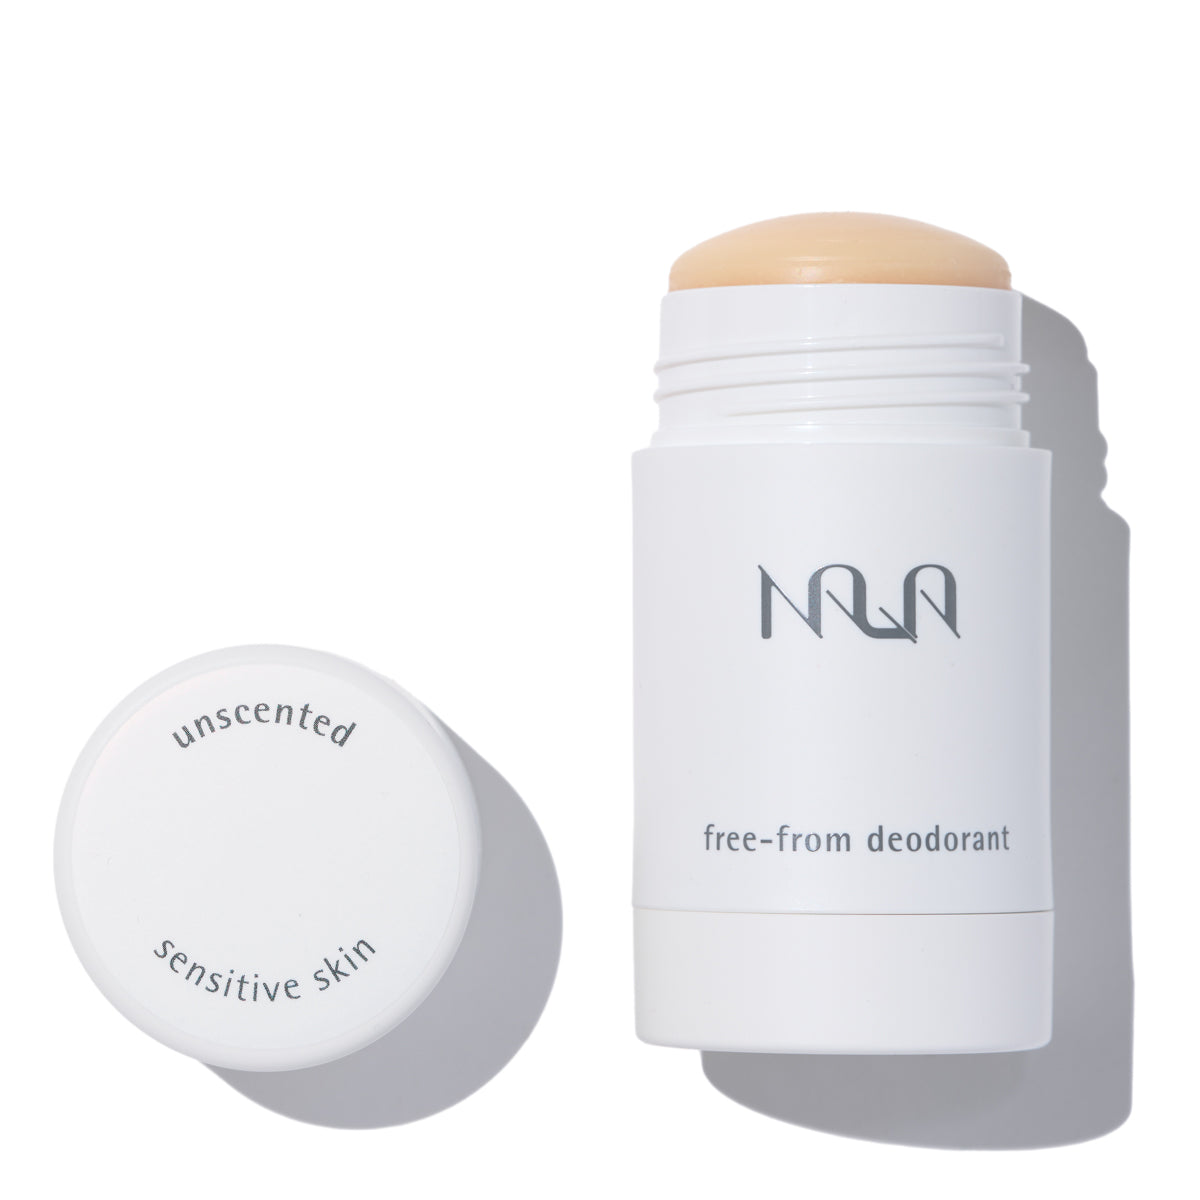 Unscented, Personalized Deodorant